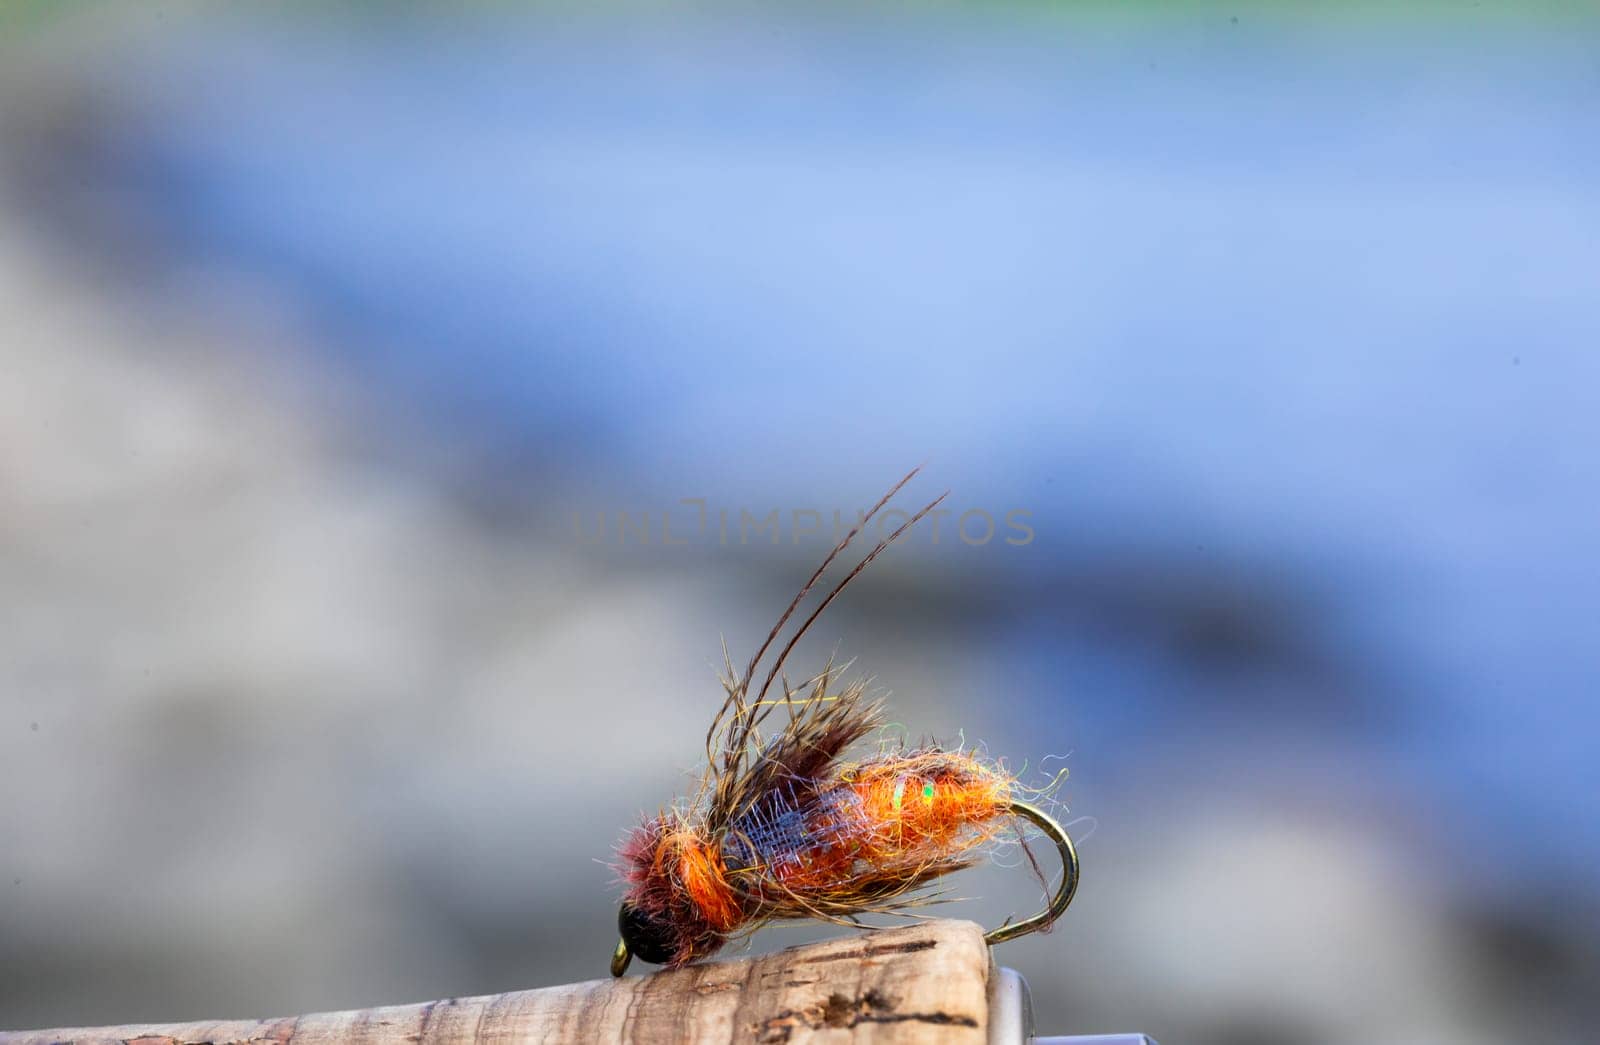 Fly Fishing Detail Closeup at the River by joshuaraineyphotography